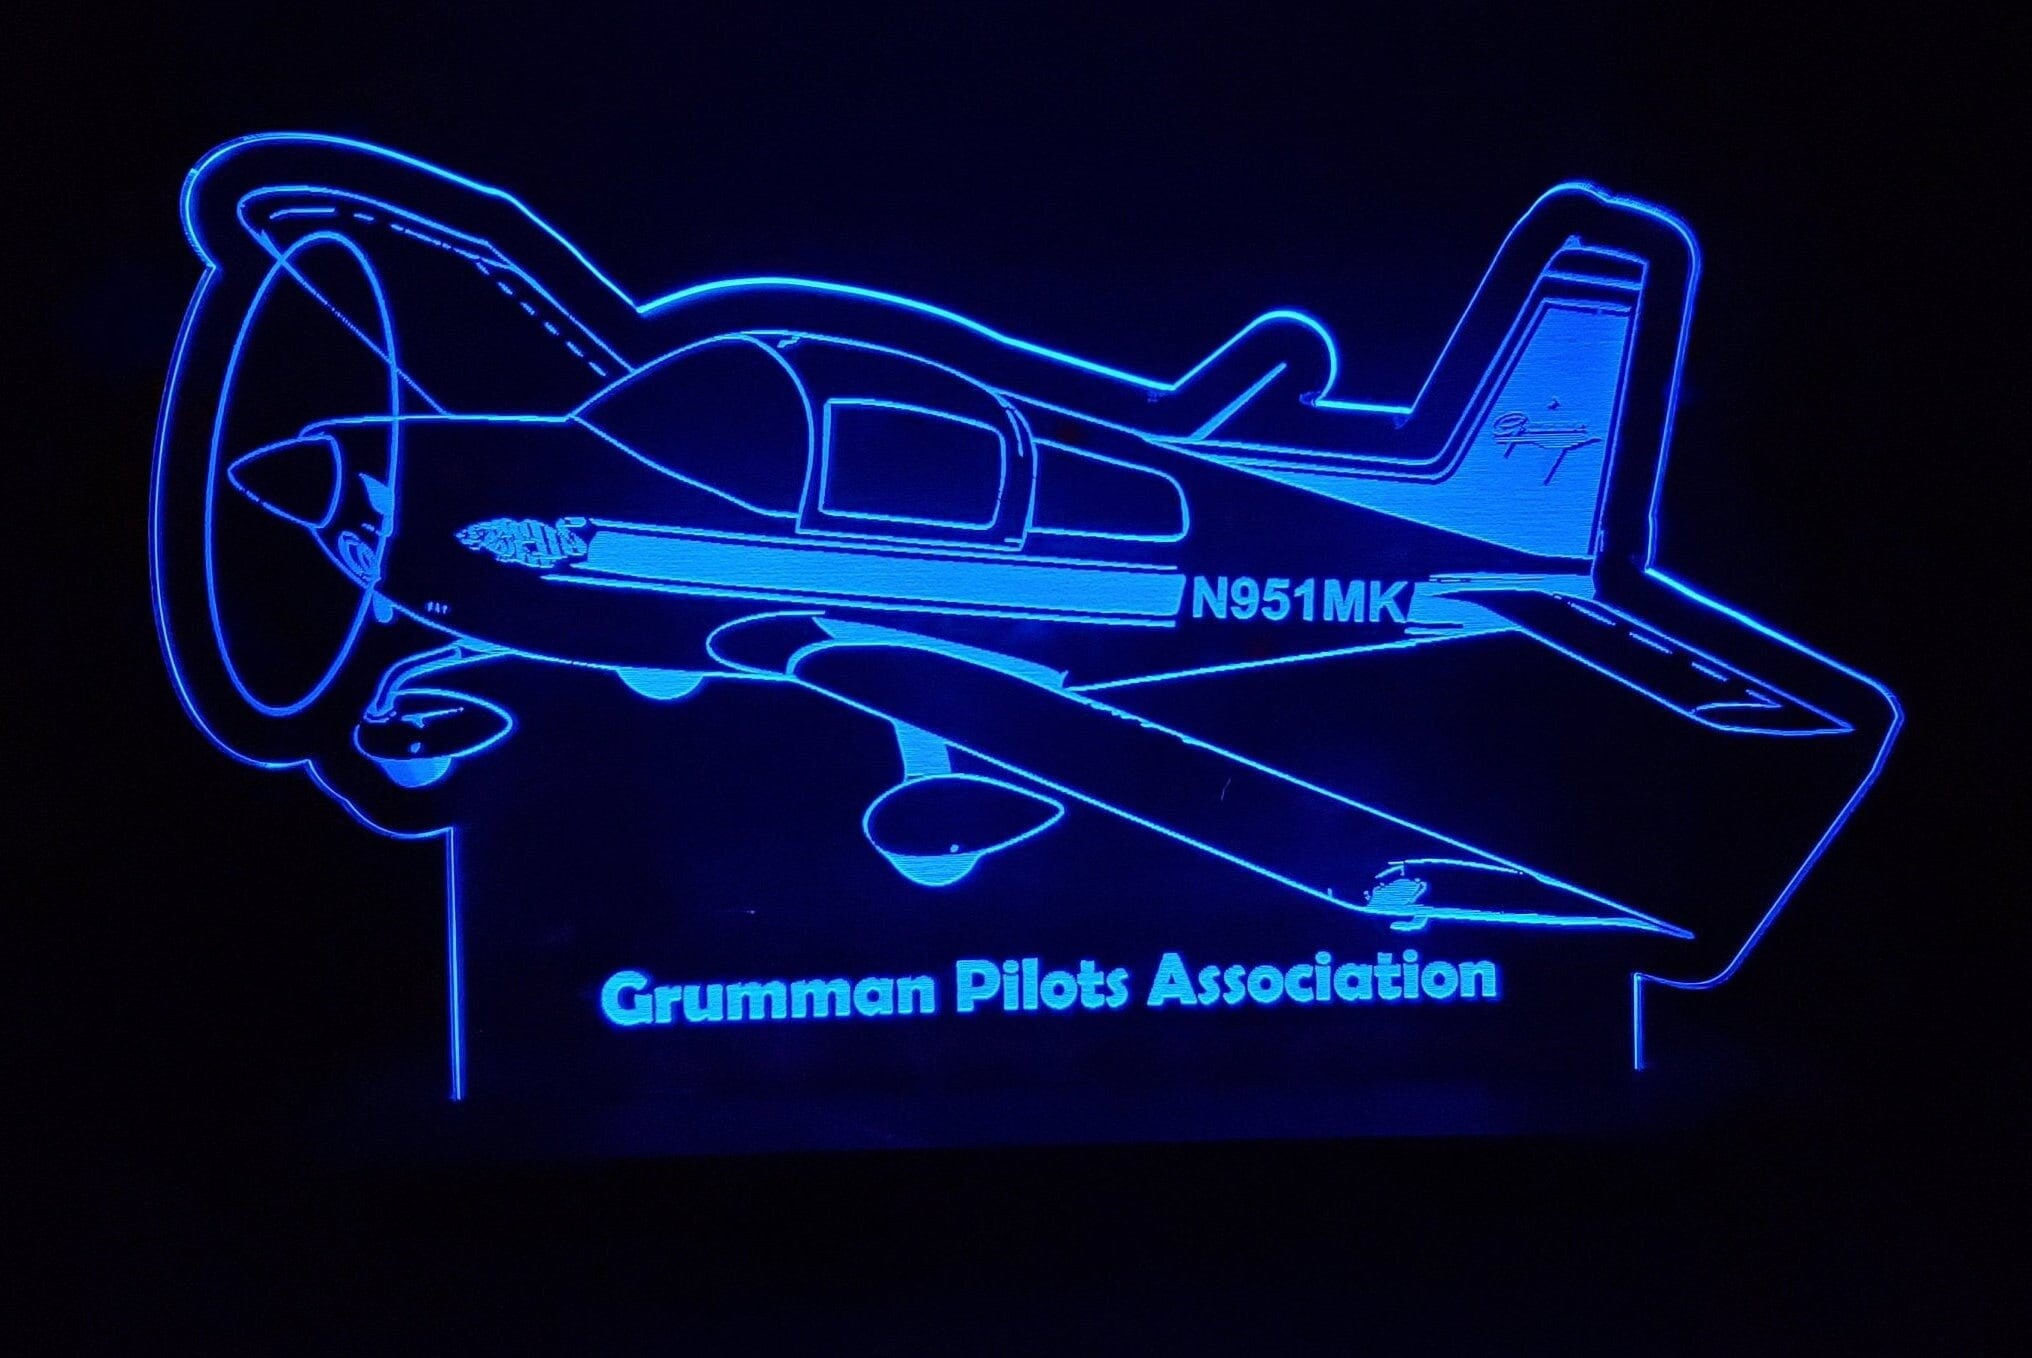 Grumman AA5 LED light lamp/sign with customizable tail number and business name - Neon-like - Free shipping - Made in USA.